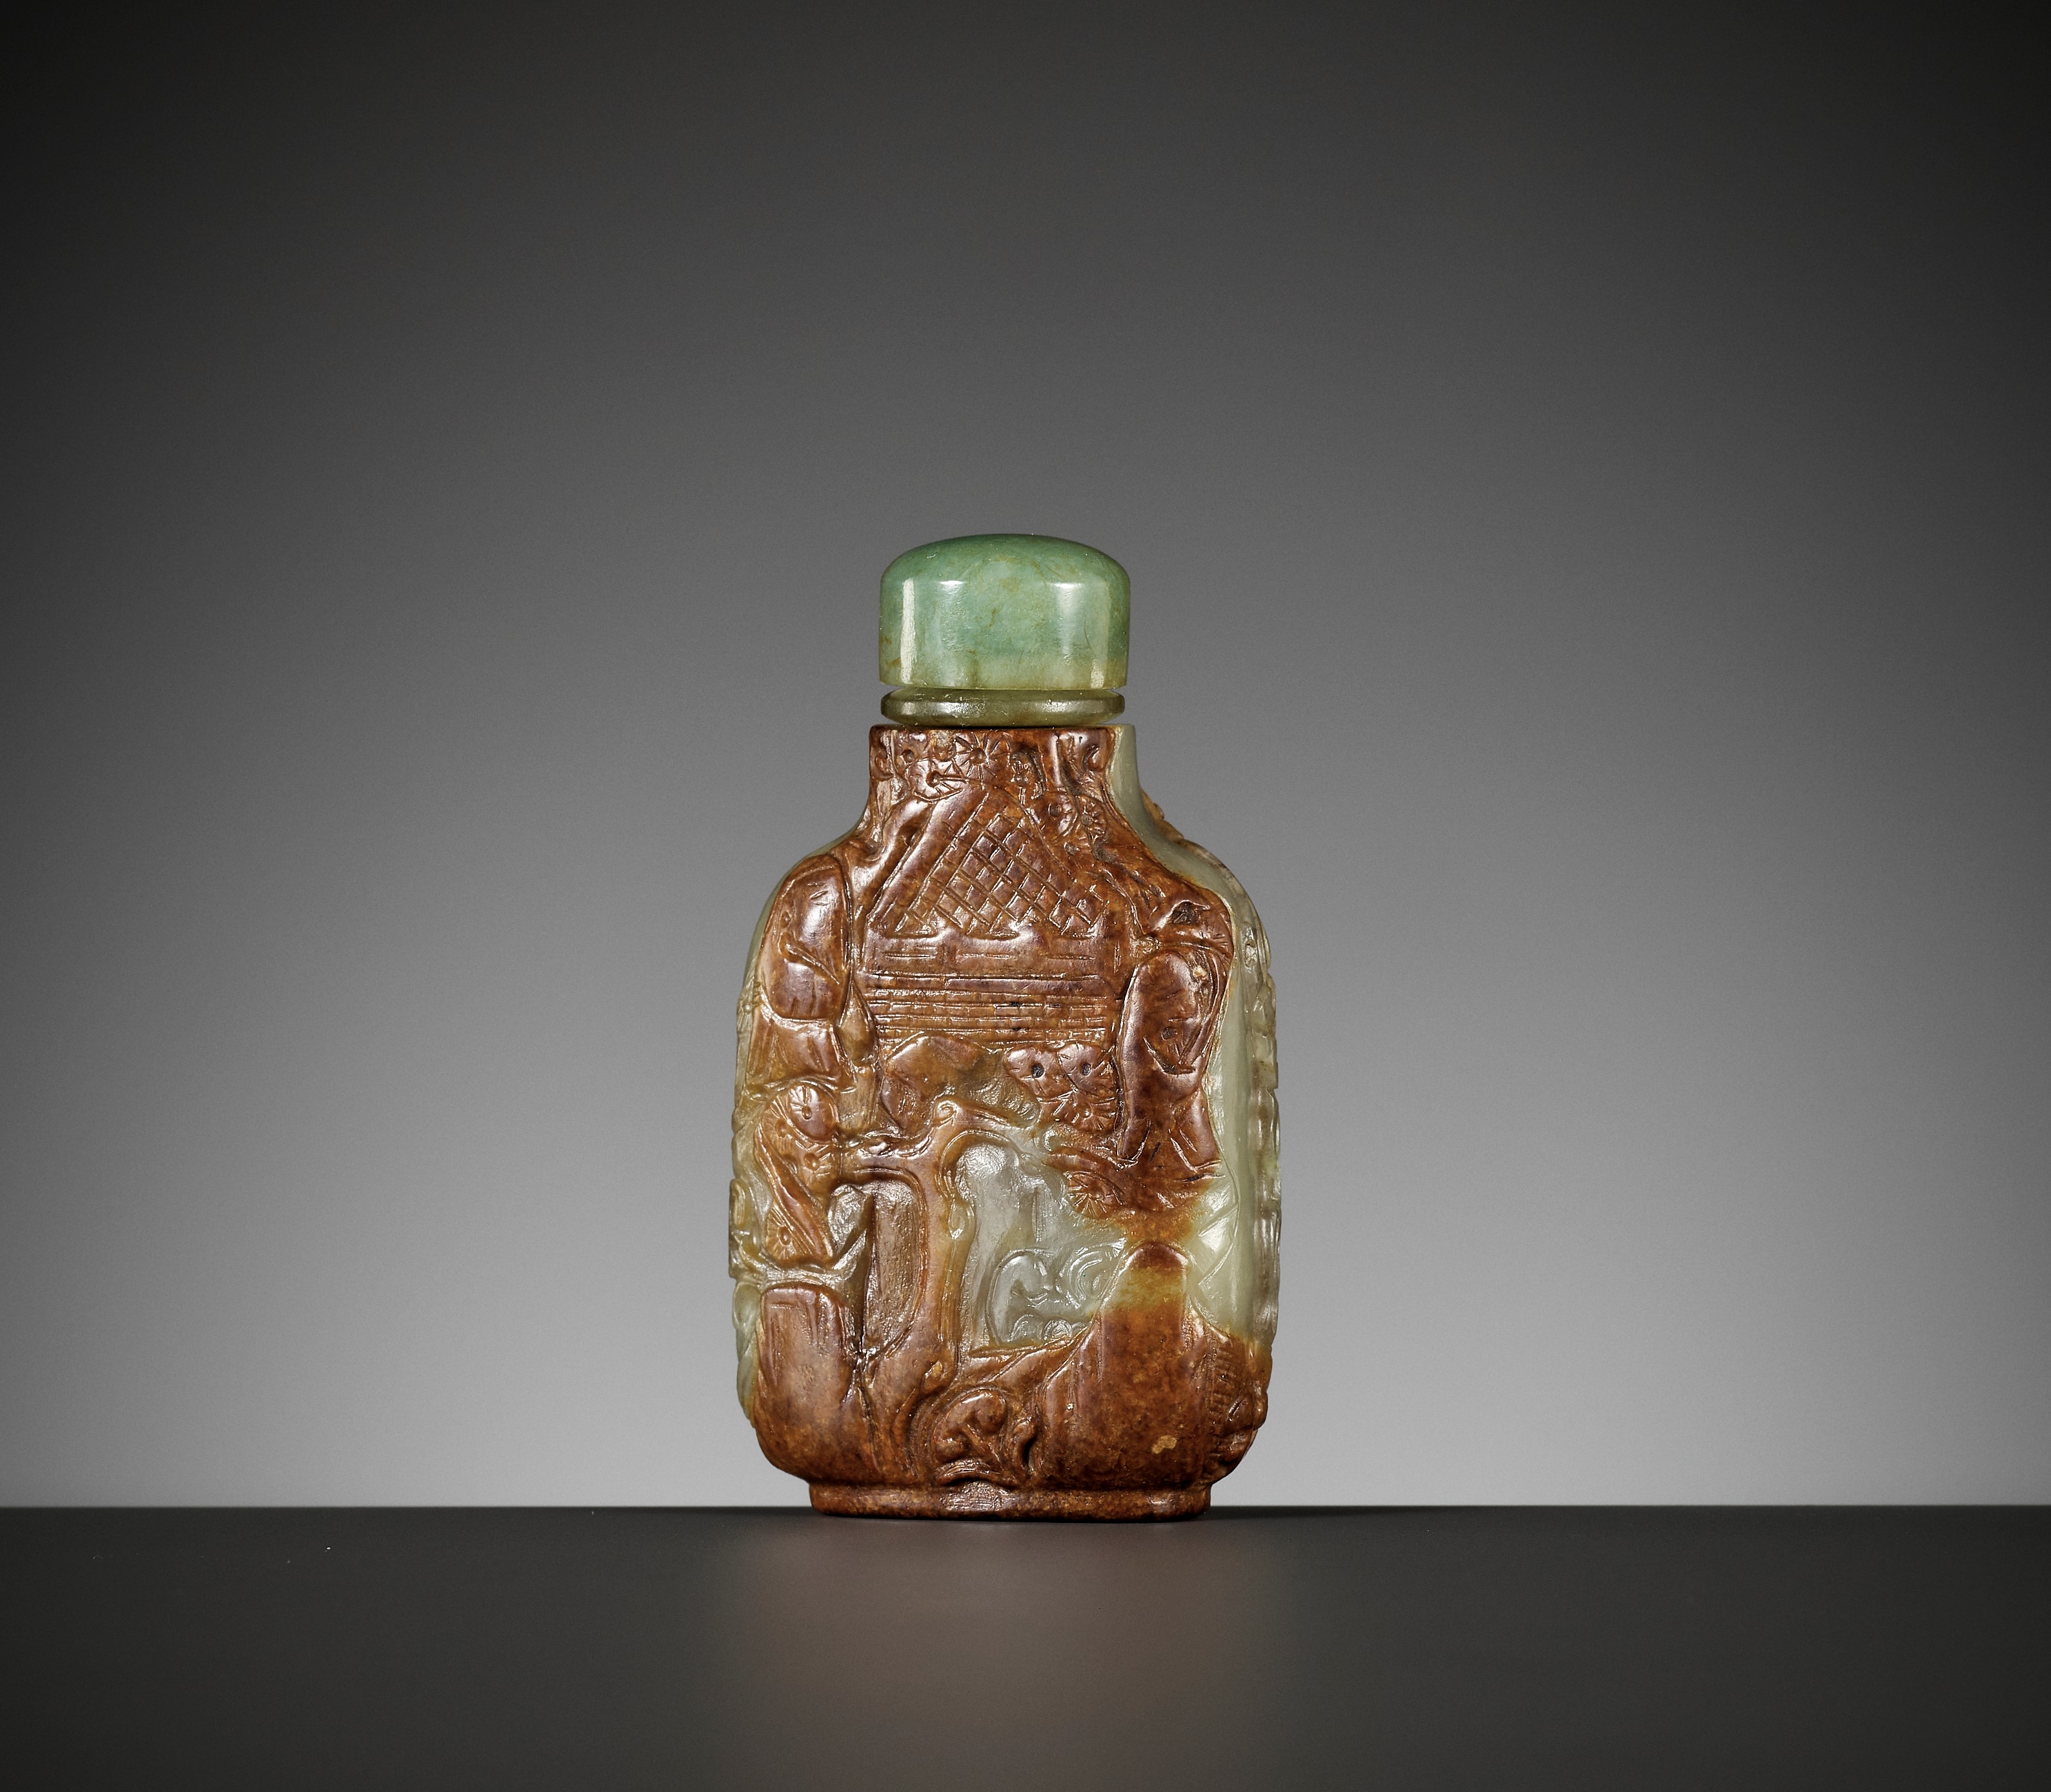 A CARVED CELADON AND RUSSET JADE SNUFF BOTTLE, MASTER OF THE ROCKS SCHOOL, 1740-1850